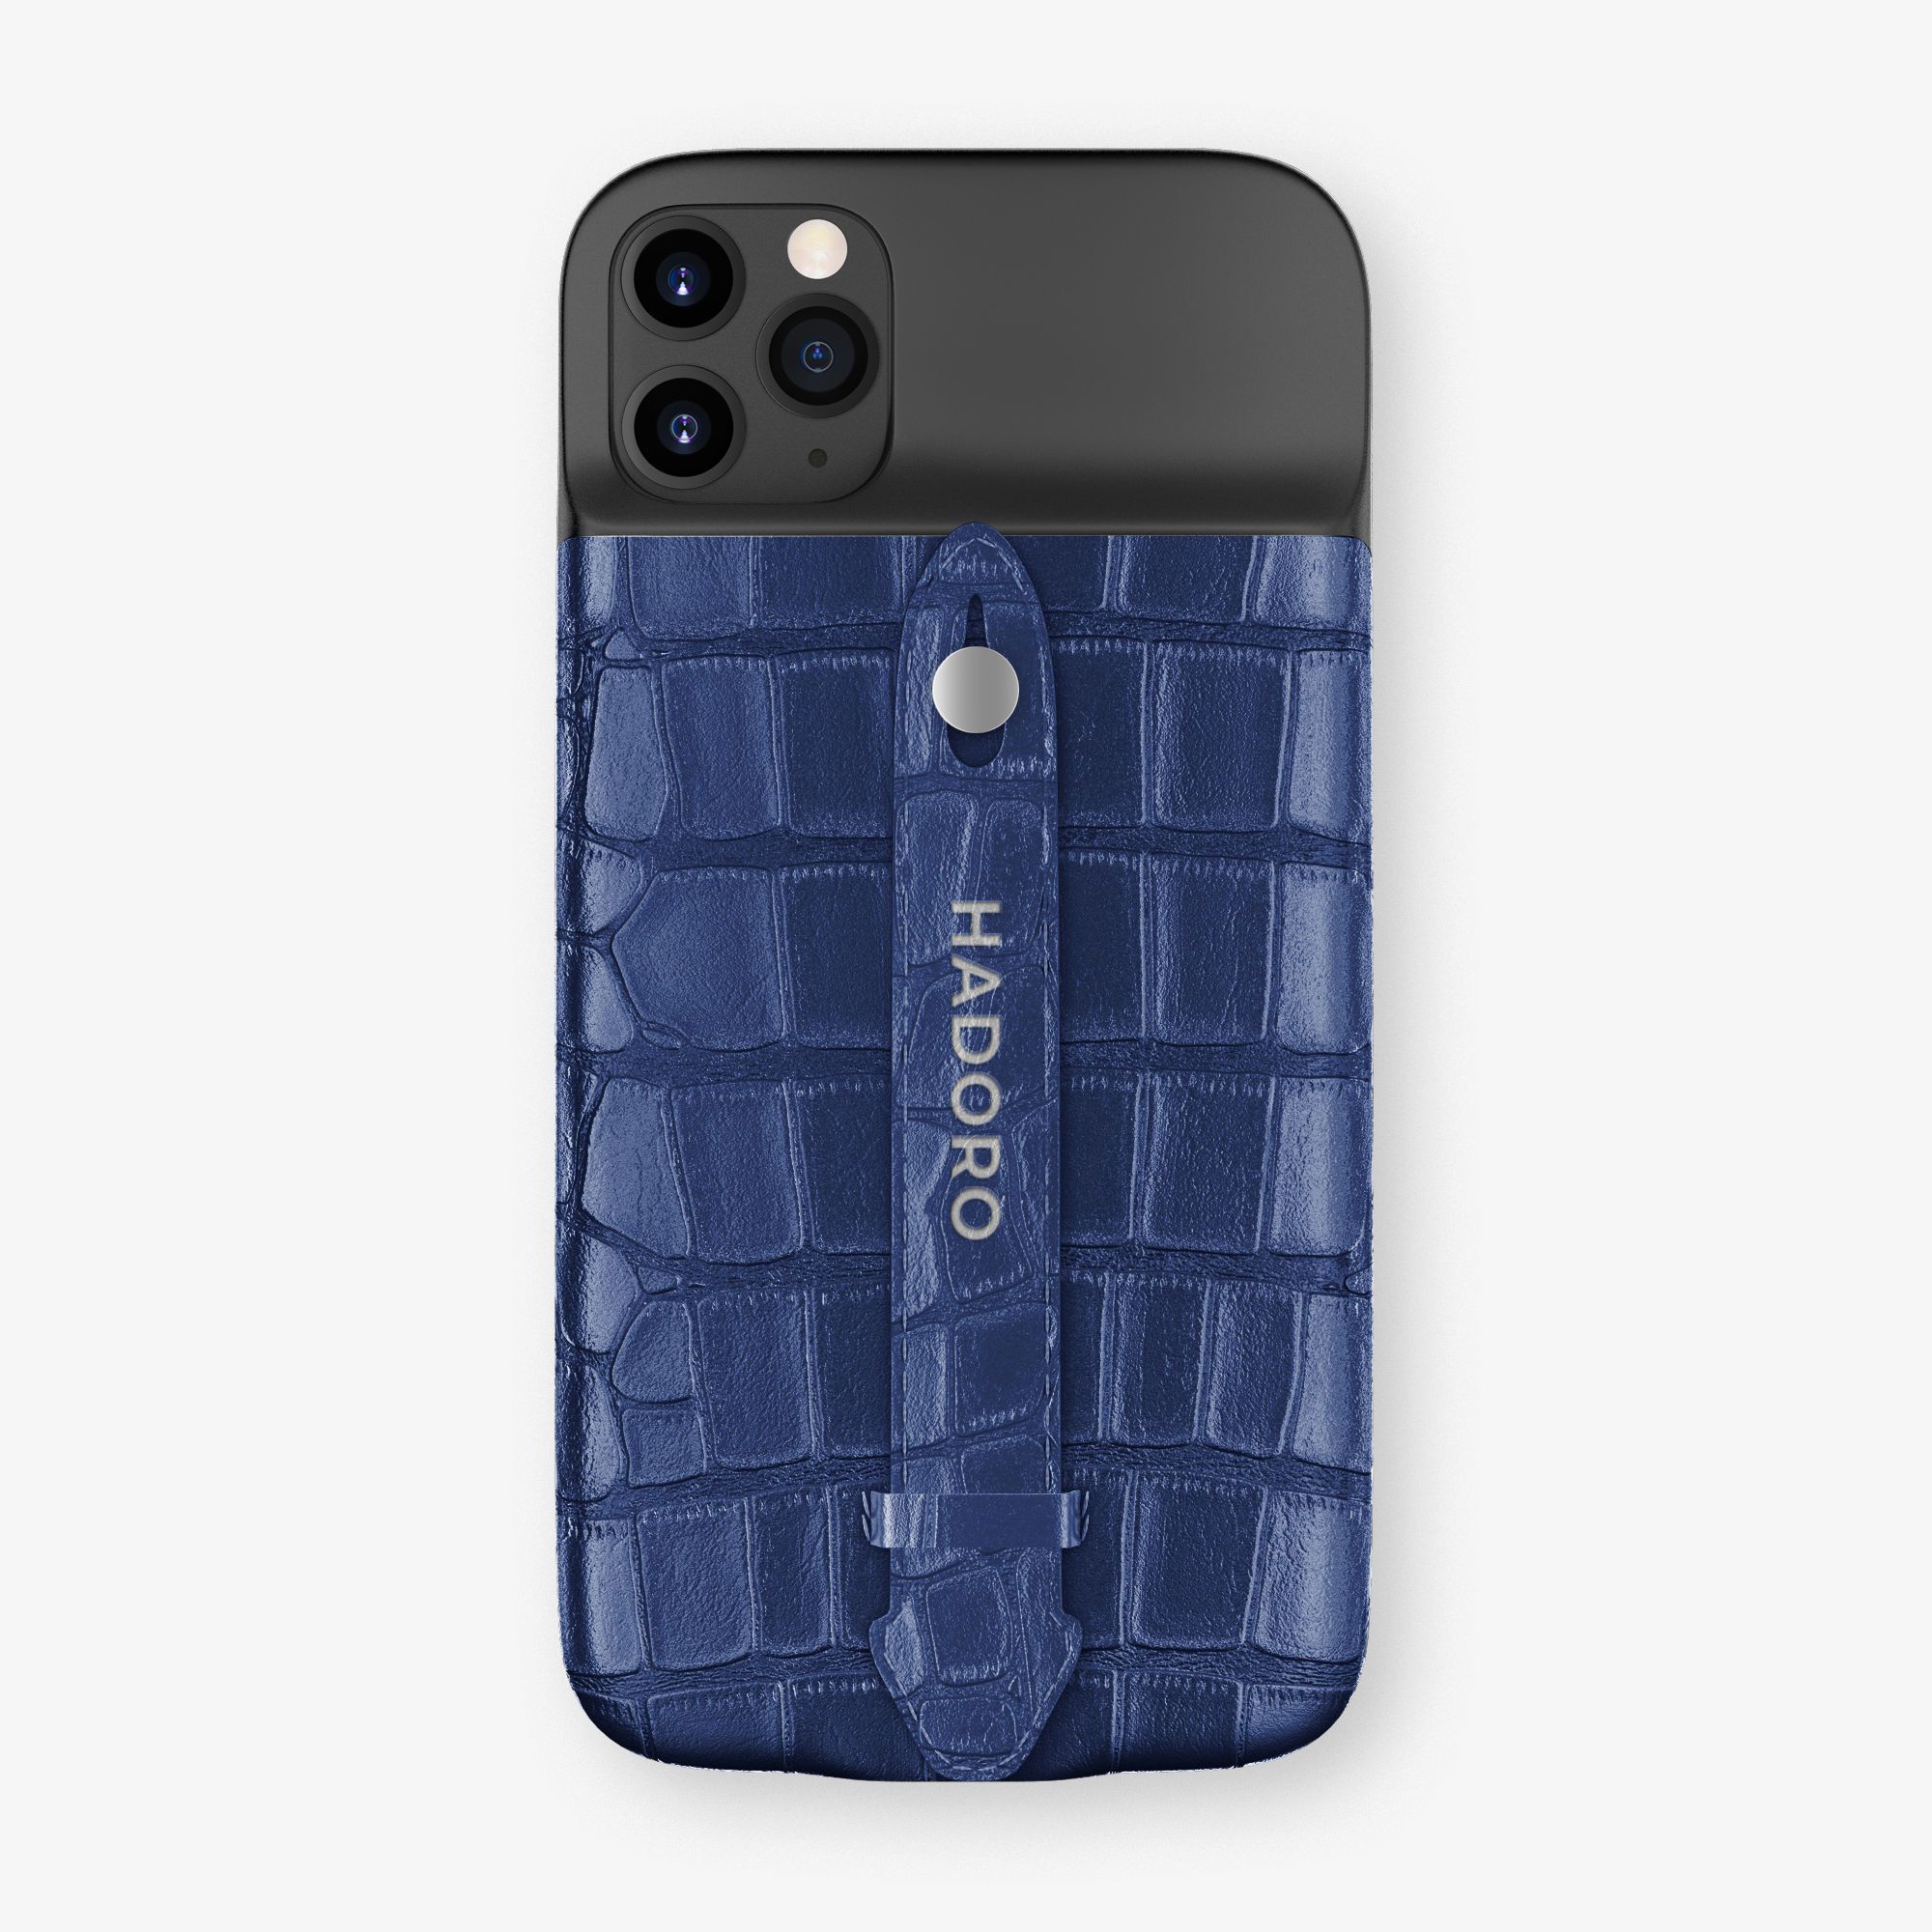 Alligator Battery Case iPhone 11 Pro Max | Navy Blue - Stainless Steel